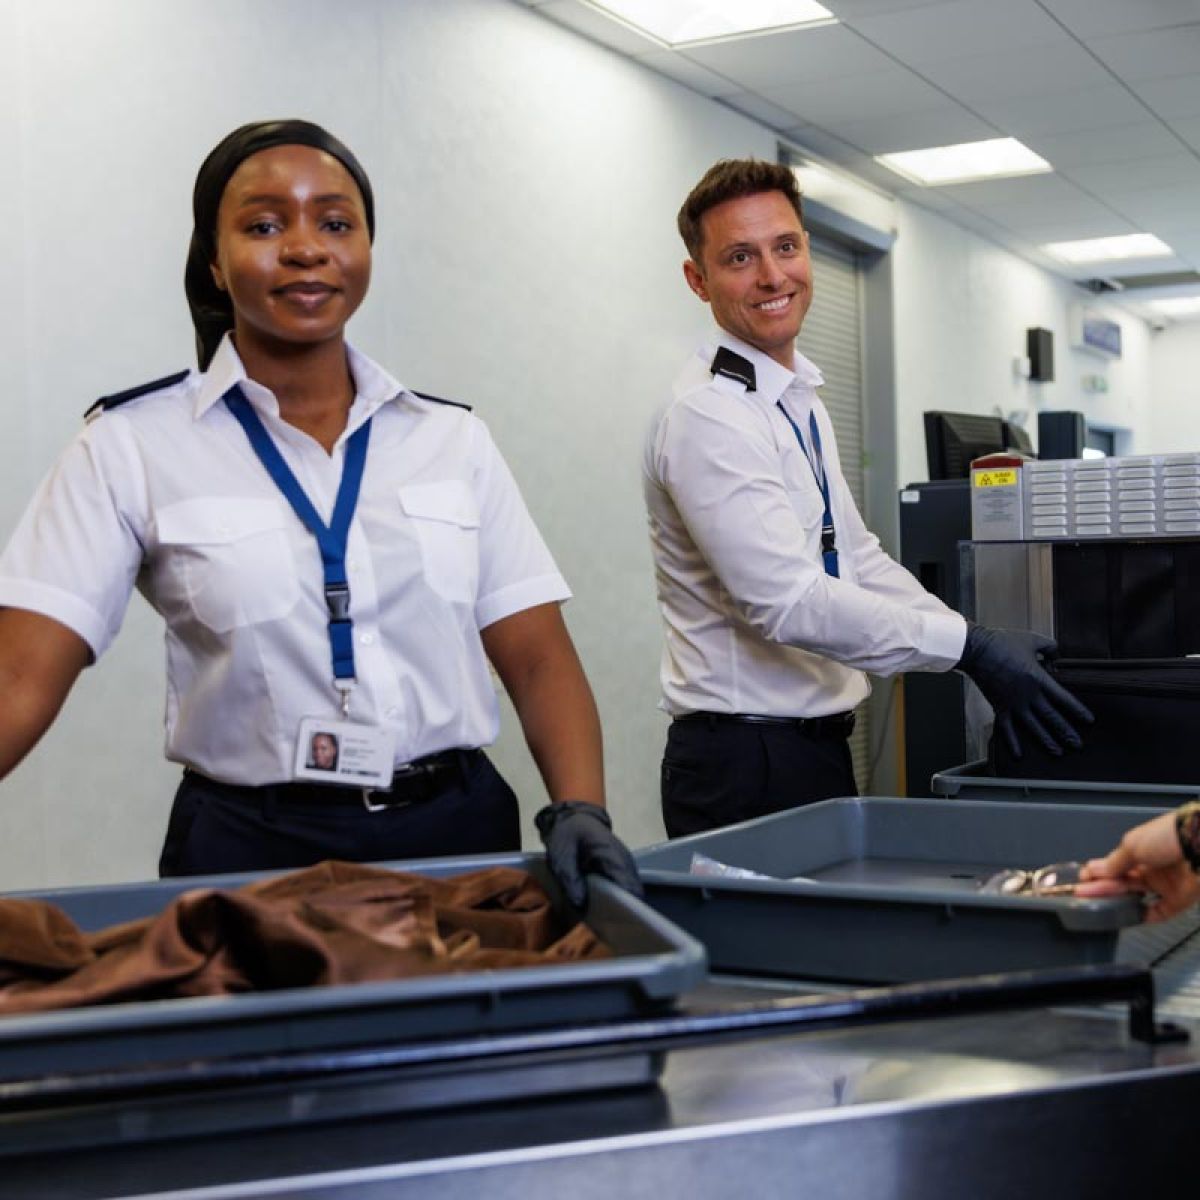 Two airport security staff